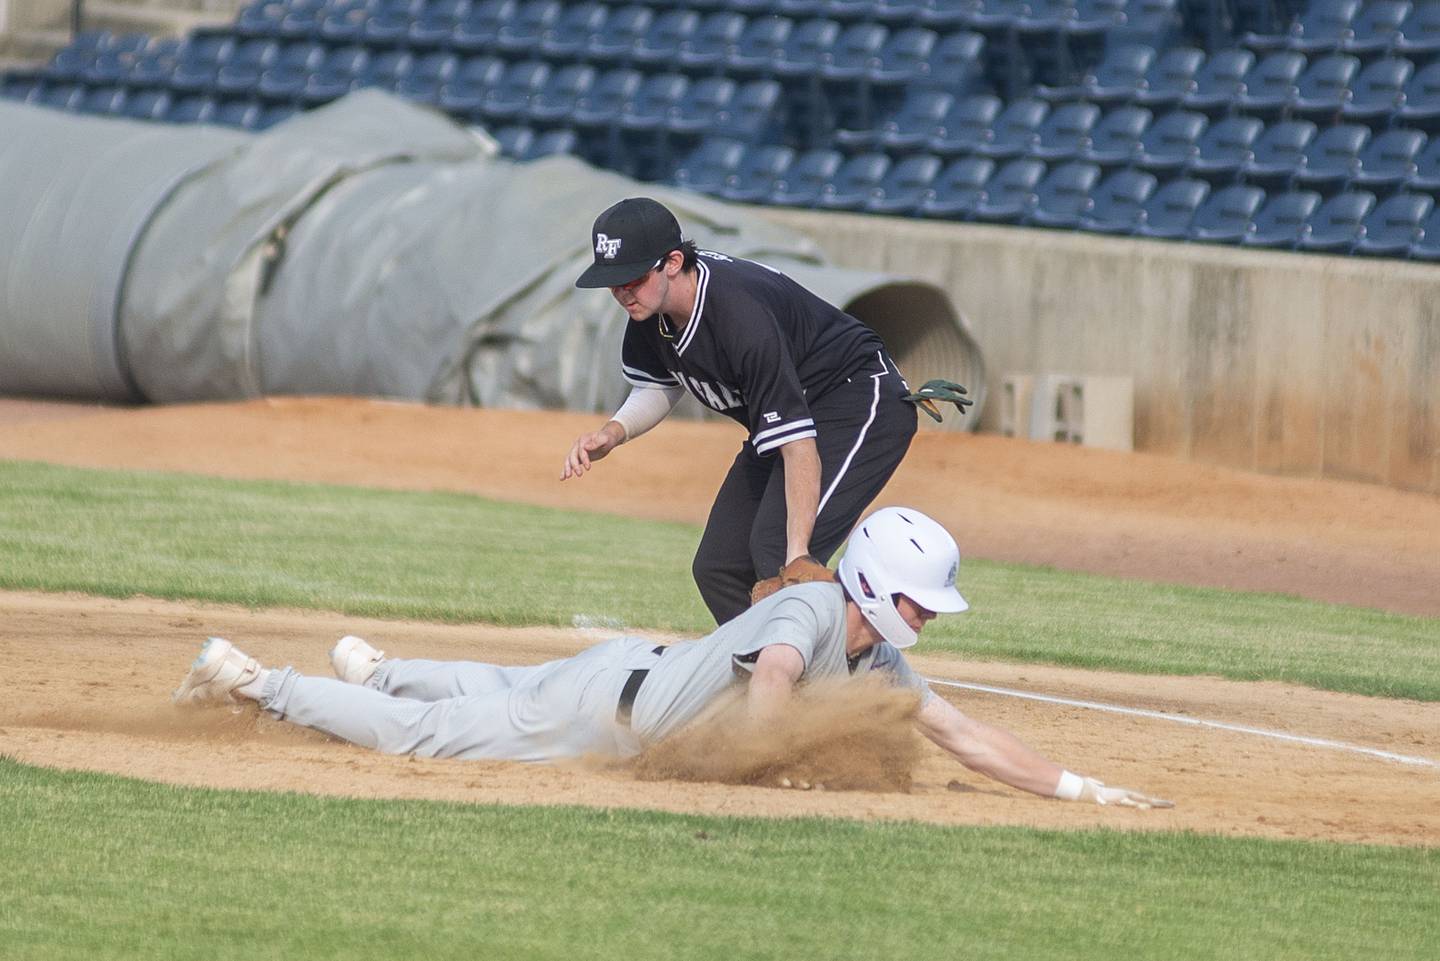 Rock Falls' Brady Richards tags out a runner Monday June 13, 2022 during the NIC-10 vs Big Northern Conference underclassmen all-star game.